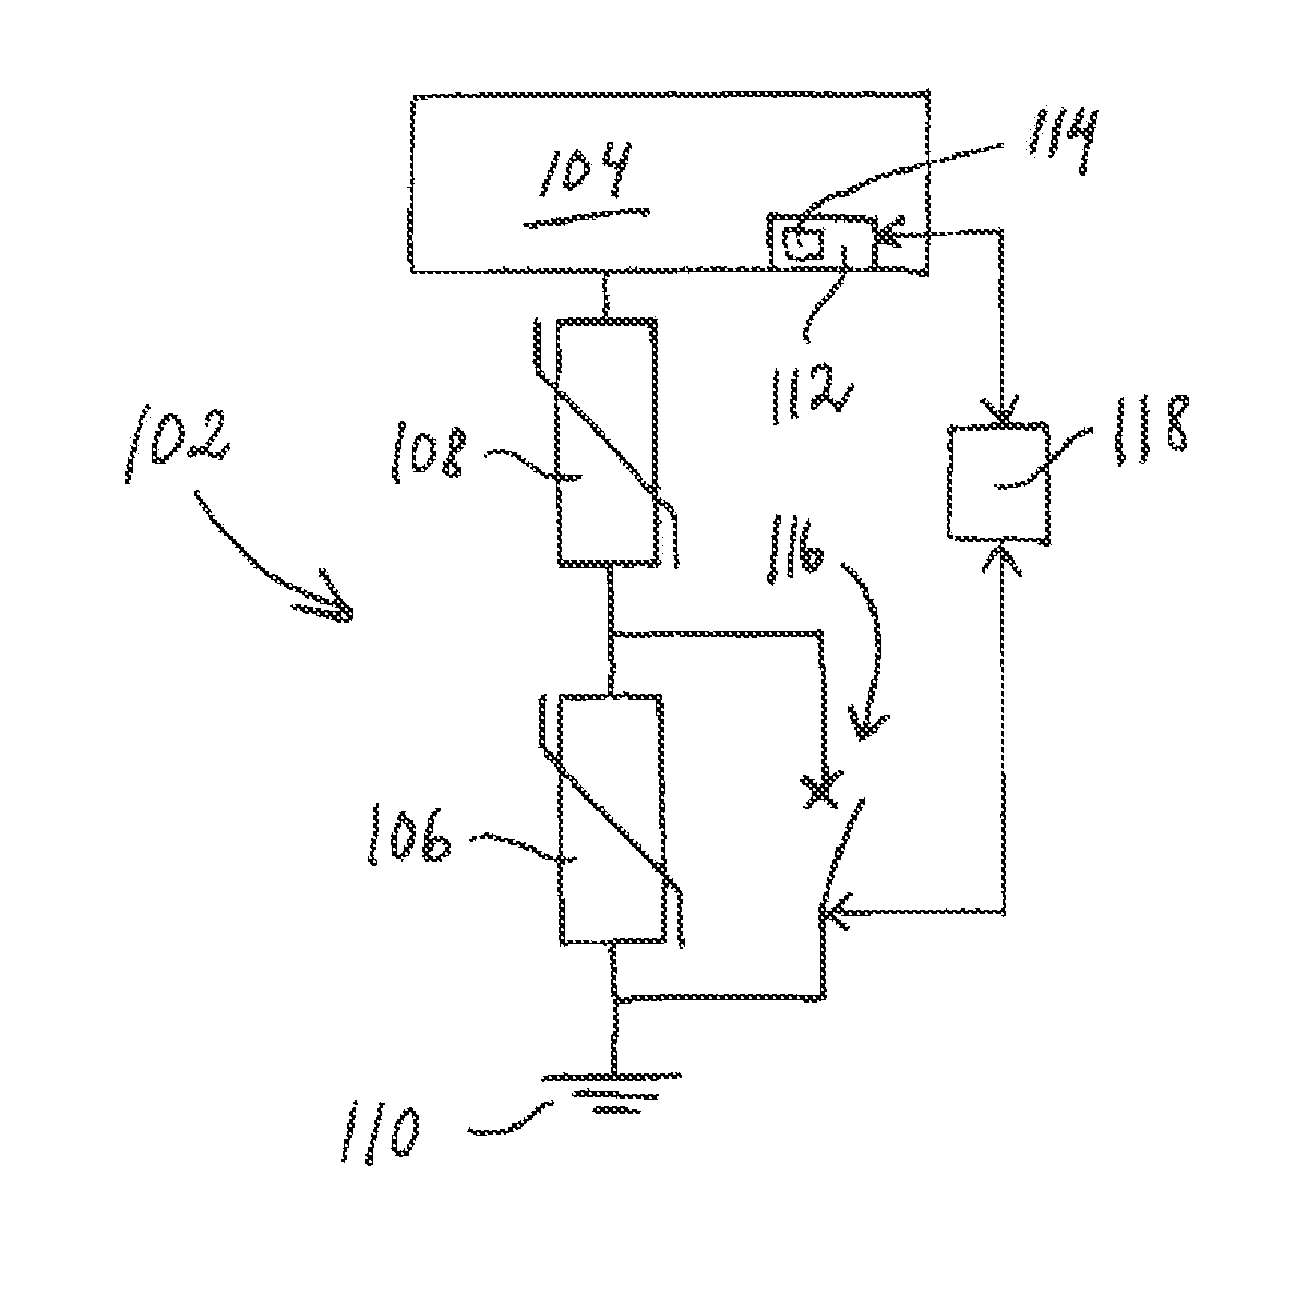 Method and a device for overvoltage protection, and an electric system with such a device